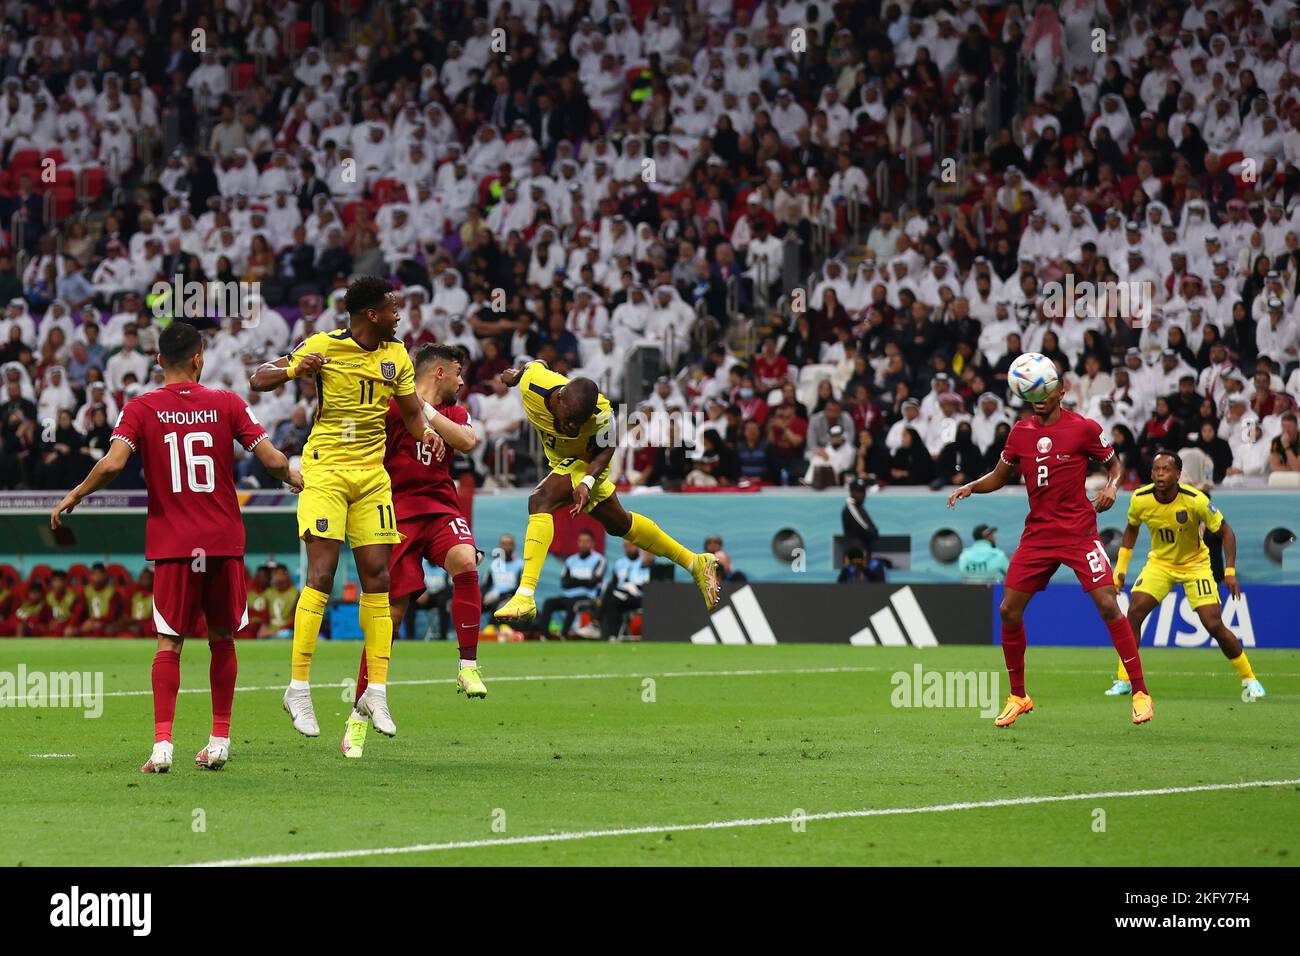 Doha, Qatar. 20th Nov, 2022. Enner Valencia of Ecuador scores his side's second goal during the 2022 FIFA World Cup Group A match at the Al Bayt Stadium in Doha, Qatar on November 20, 2022. Photo by Chris Brunskill/UPI Credit: UPI/Alamy Live News Stock Photo